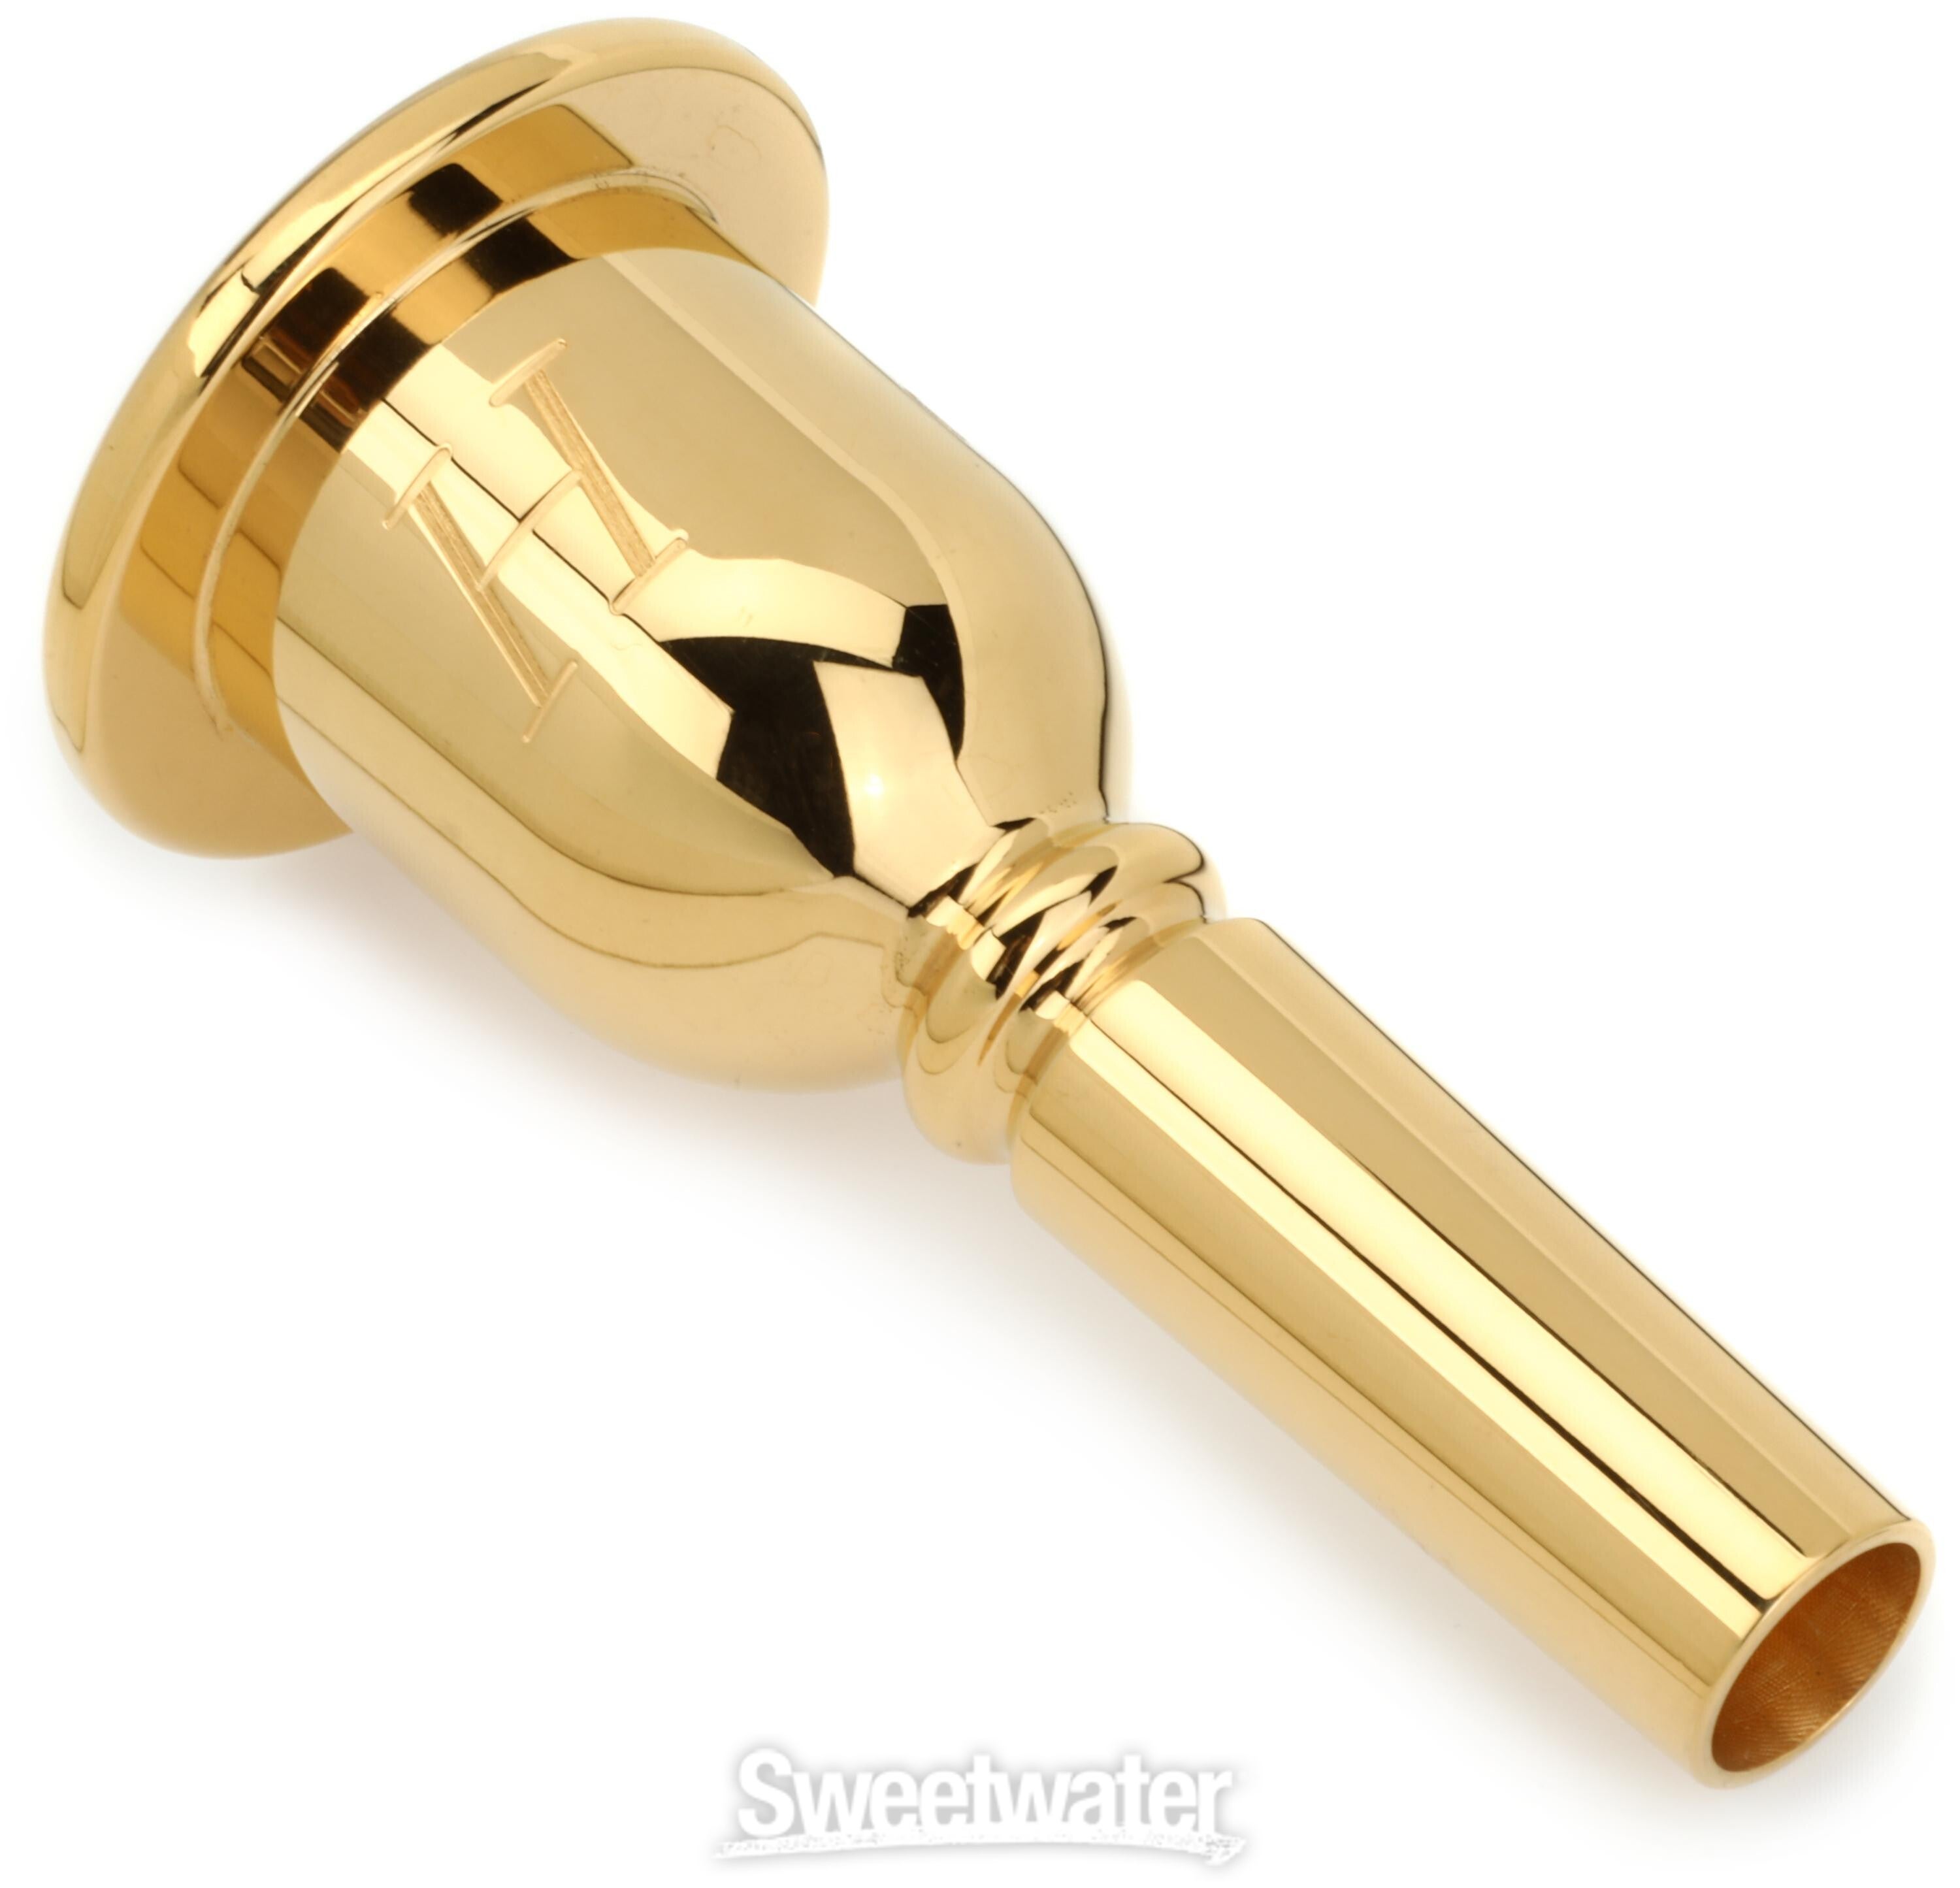 Denis Wick 5ABL Heritage Series Trombone Mouthpiece - 5ABL Gold